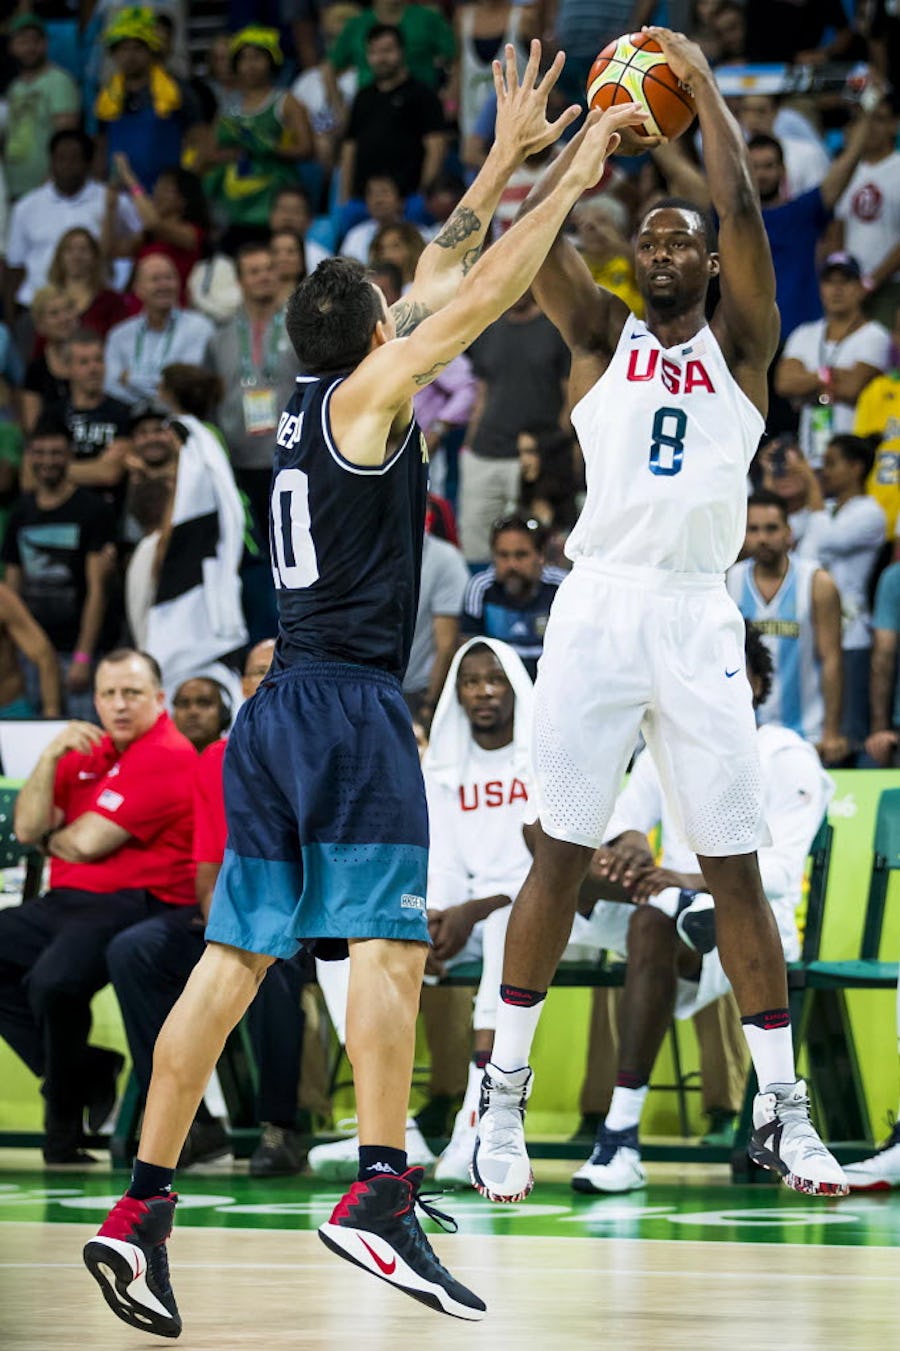 Harrison Barnes (8) of United States shoots over Carlos Delfino (10) of Argentina during a men's basketball quarterfinal at the Rio 2016 Olympic Games on Wednesday, Aug. 17, 2016, in Rio de Janeiro. (Smiley N. Pool/The Dallas Morning News)